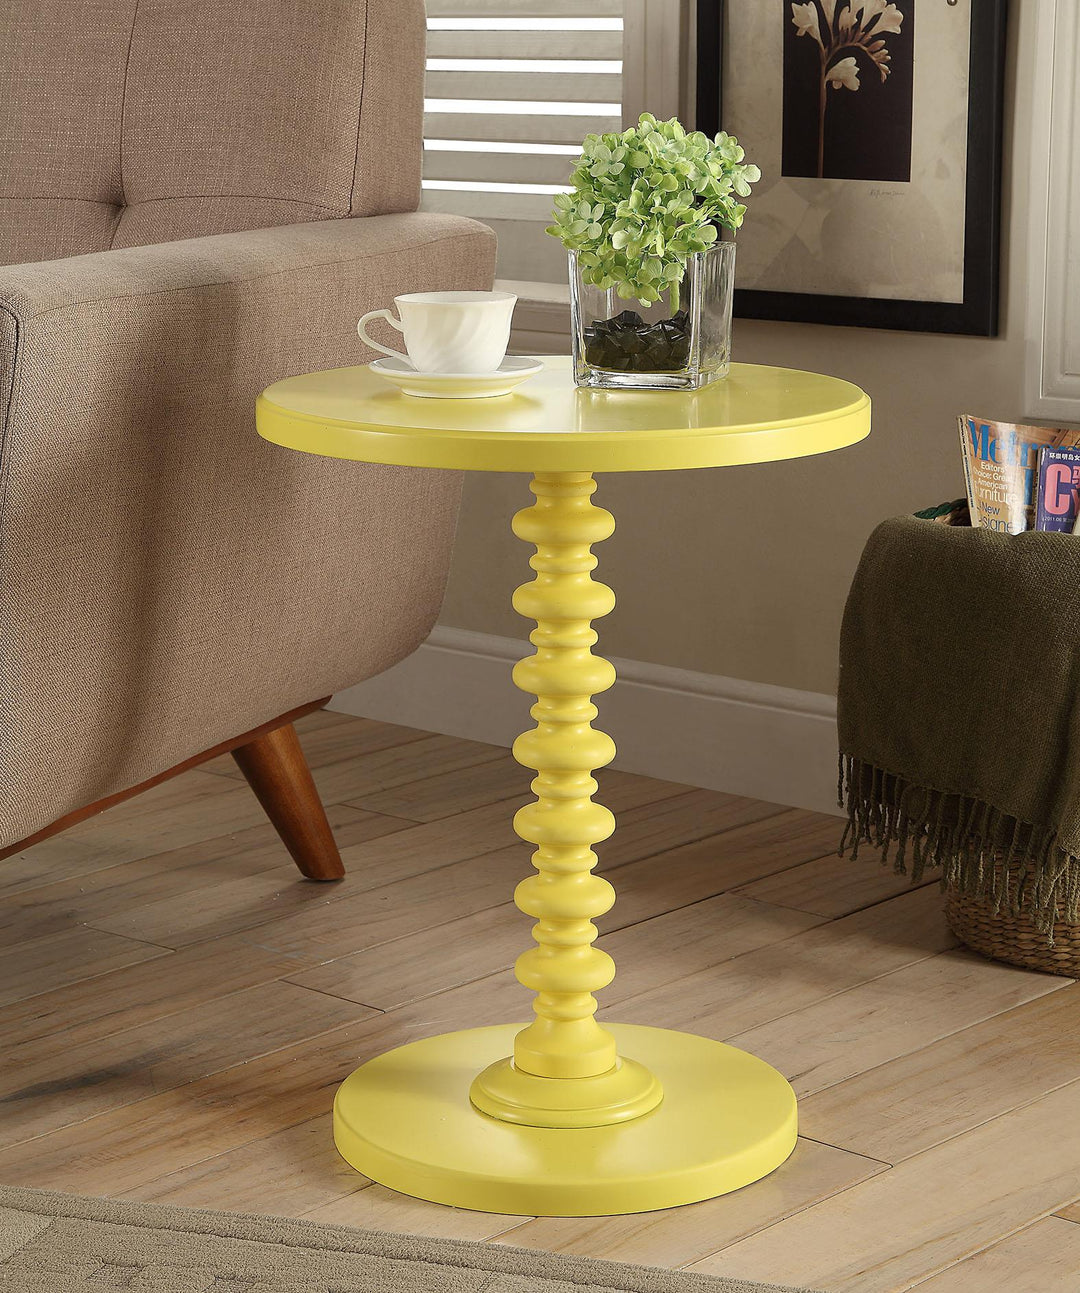 Pedestal Accent Table for bedroom - Yellow